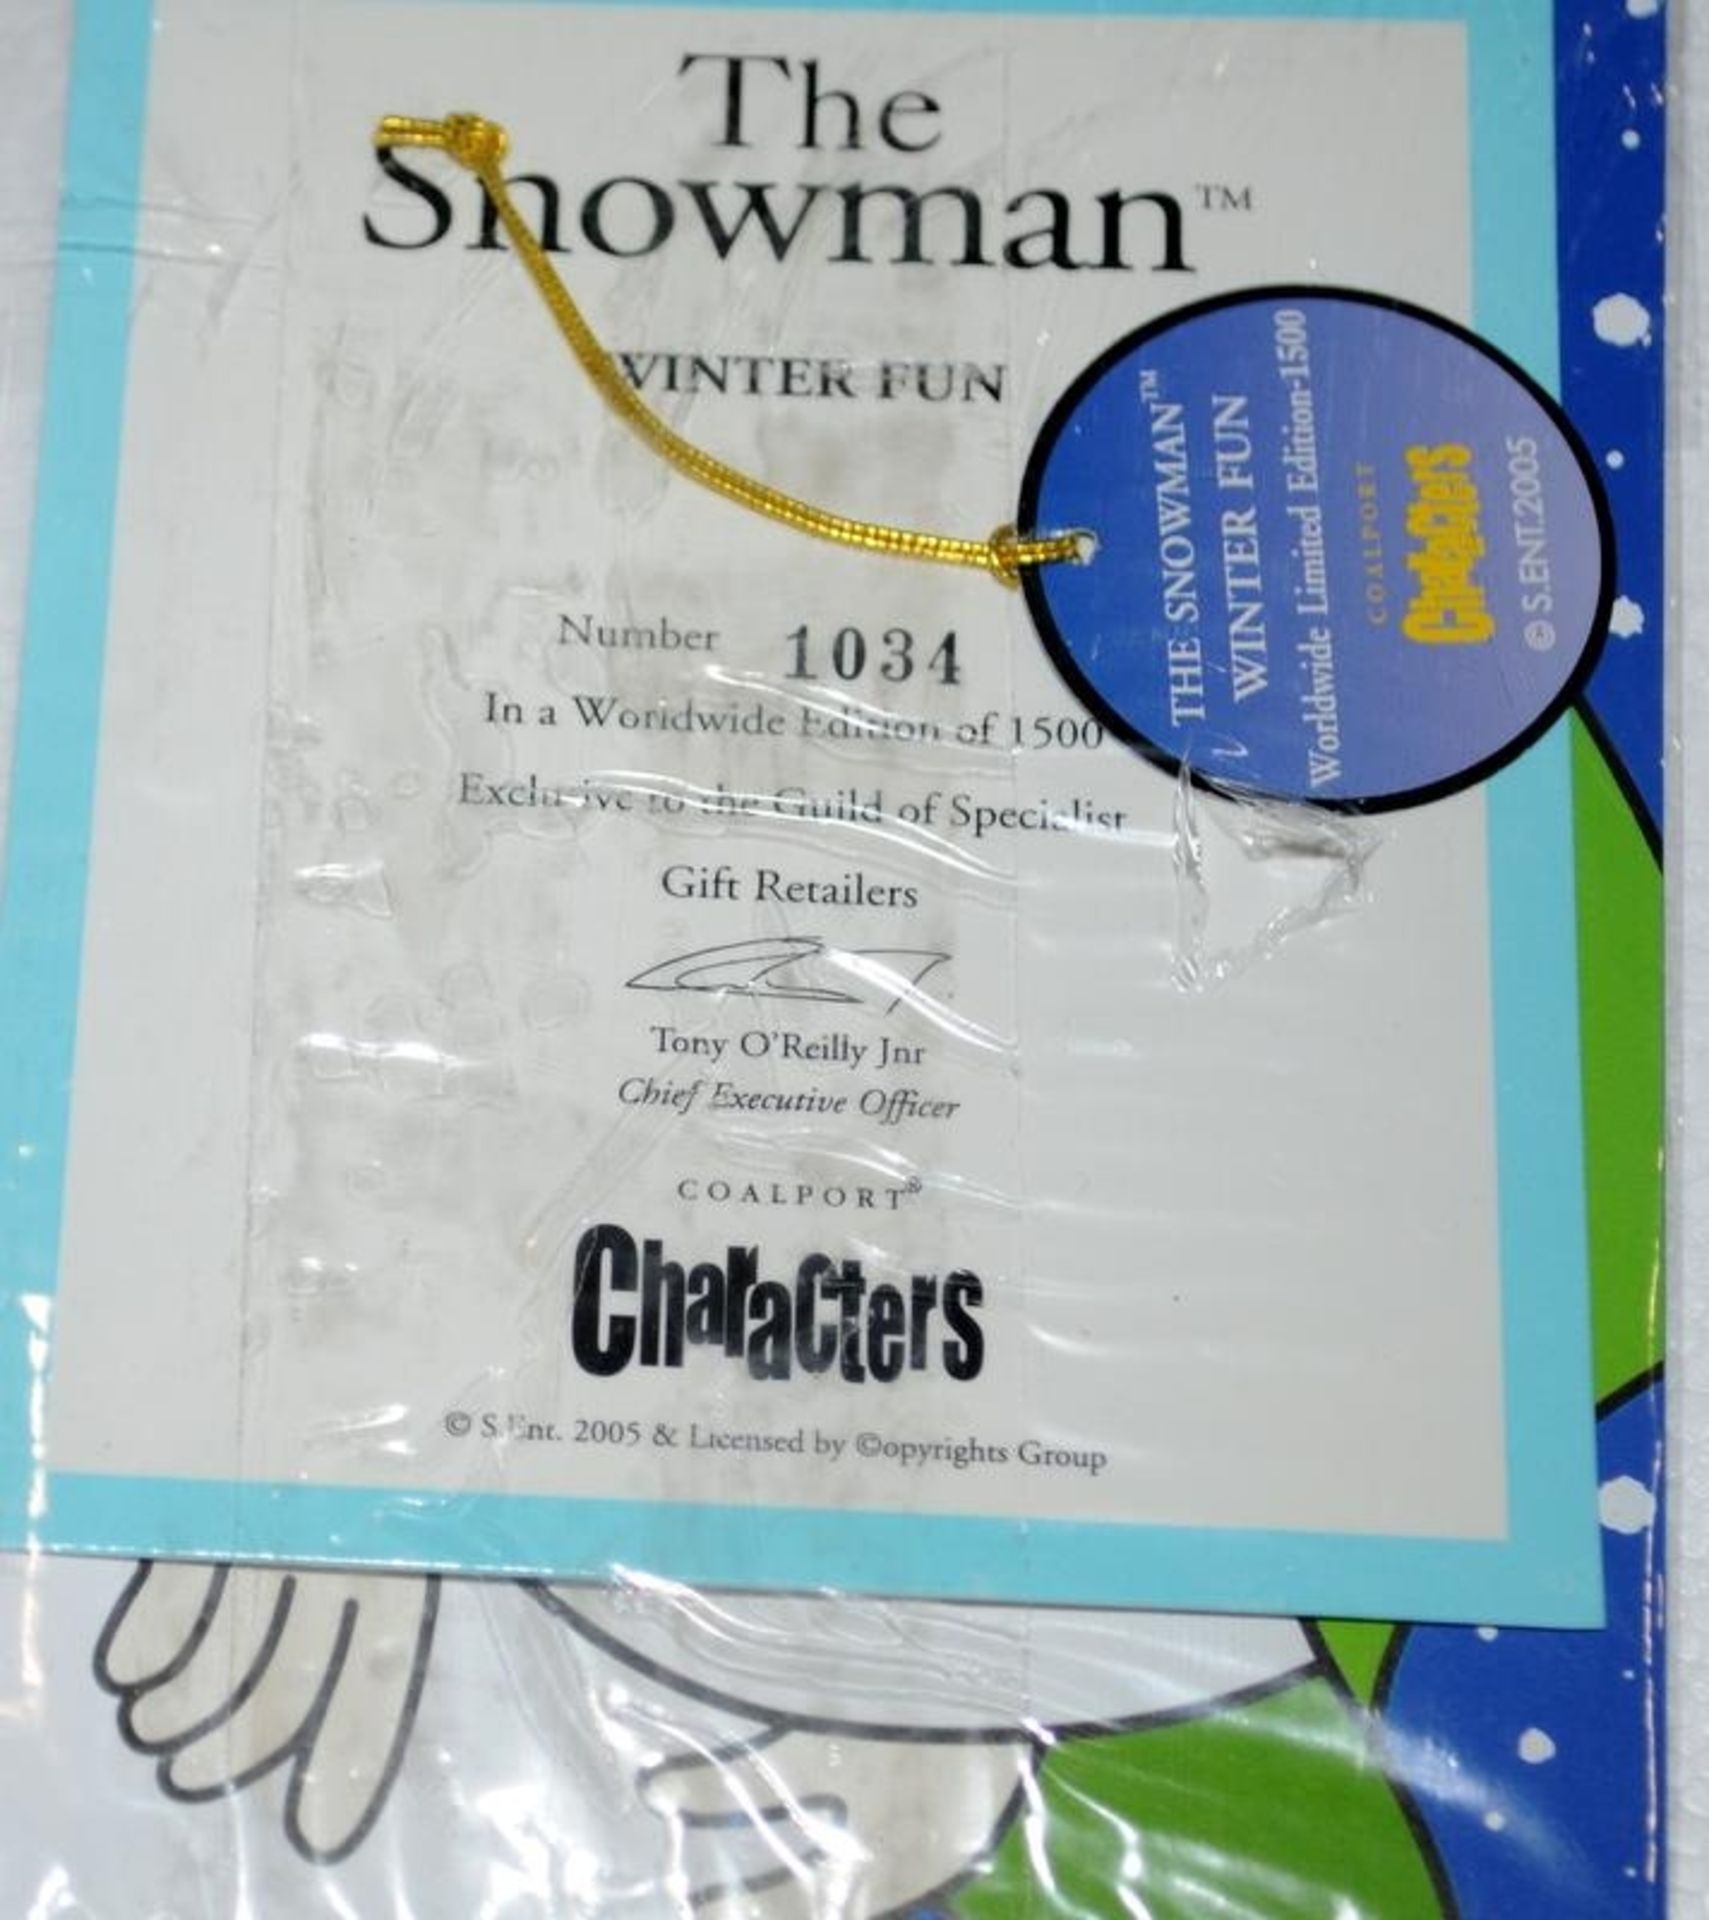 Coalport The Snowman Limited Edition Figurine: Winter Fun 1034/1500. Boxed with certificate - Image 3 of 4